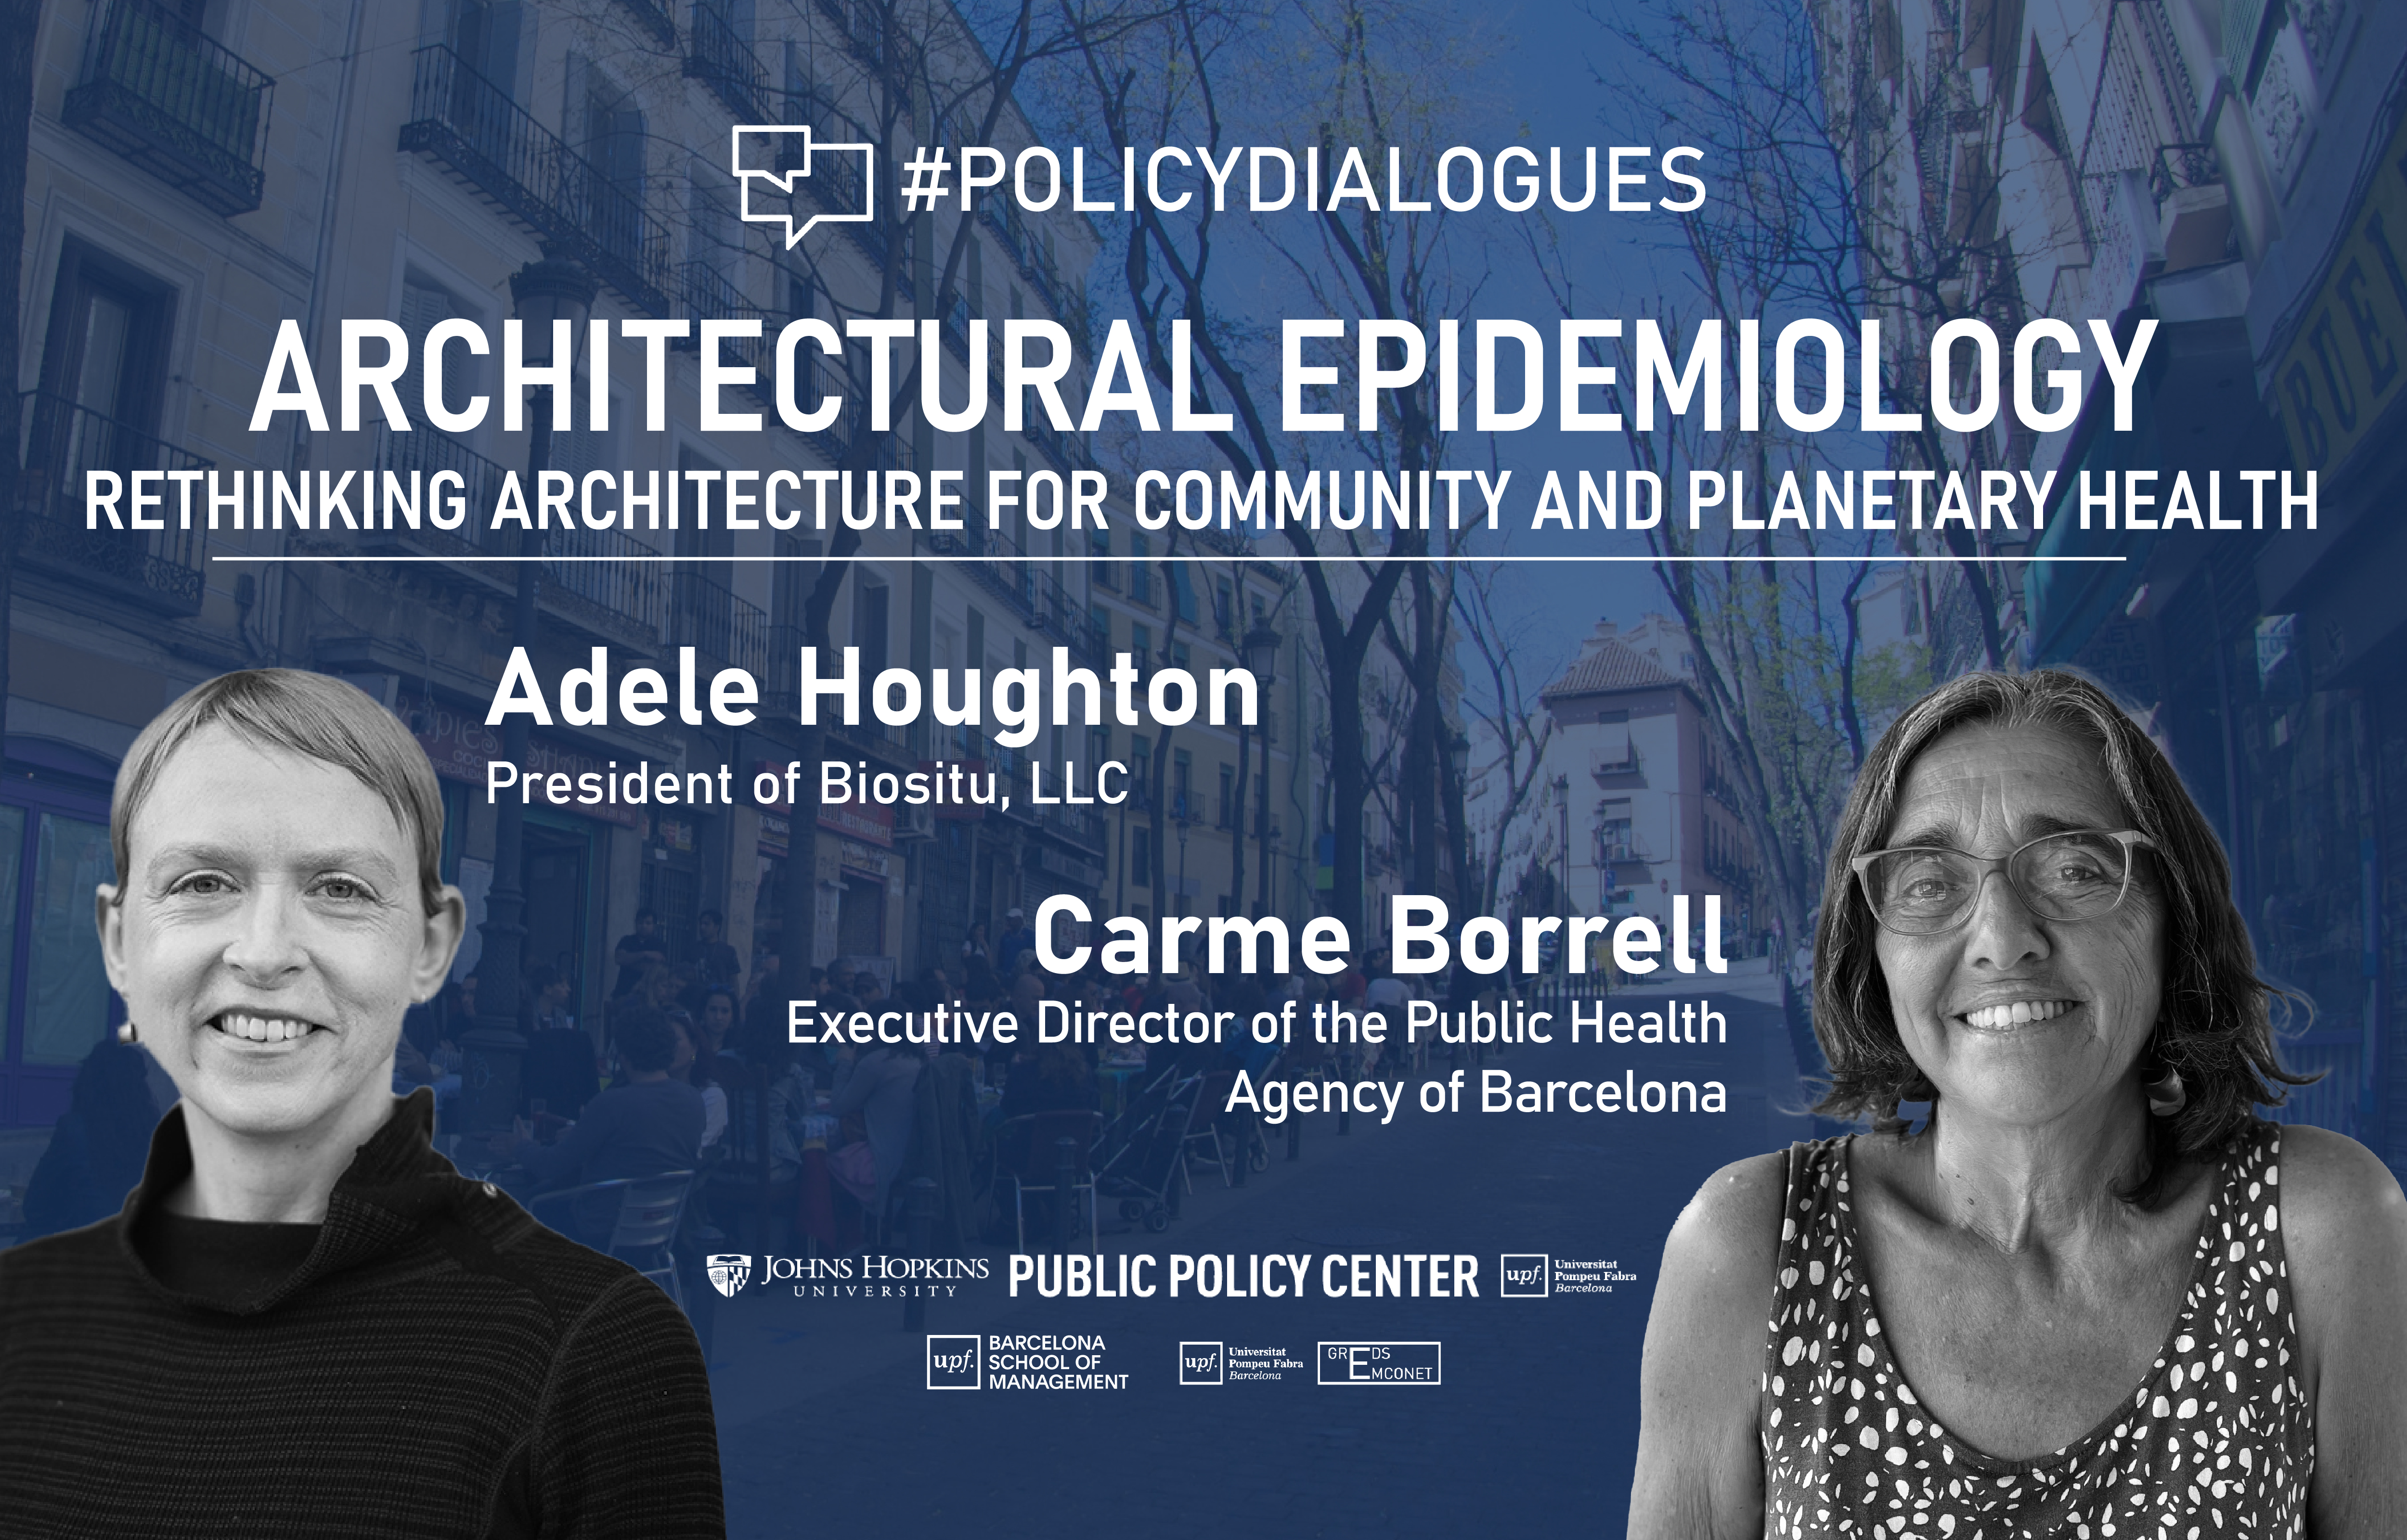 “Architecture can be used as a mechanism for promoting community health”. Report of the 15th edition of the Policy Dialogues series